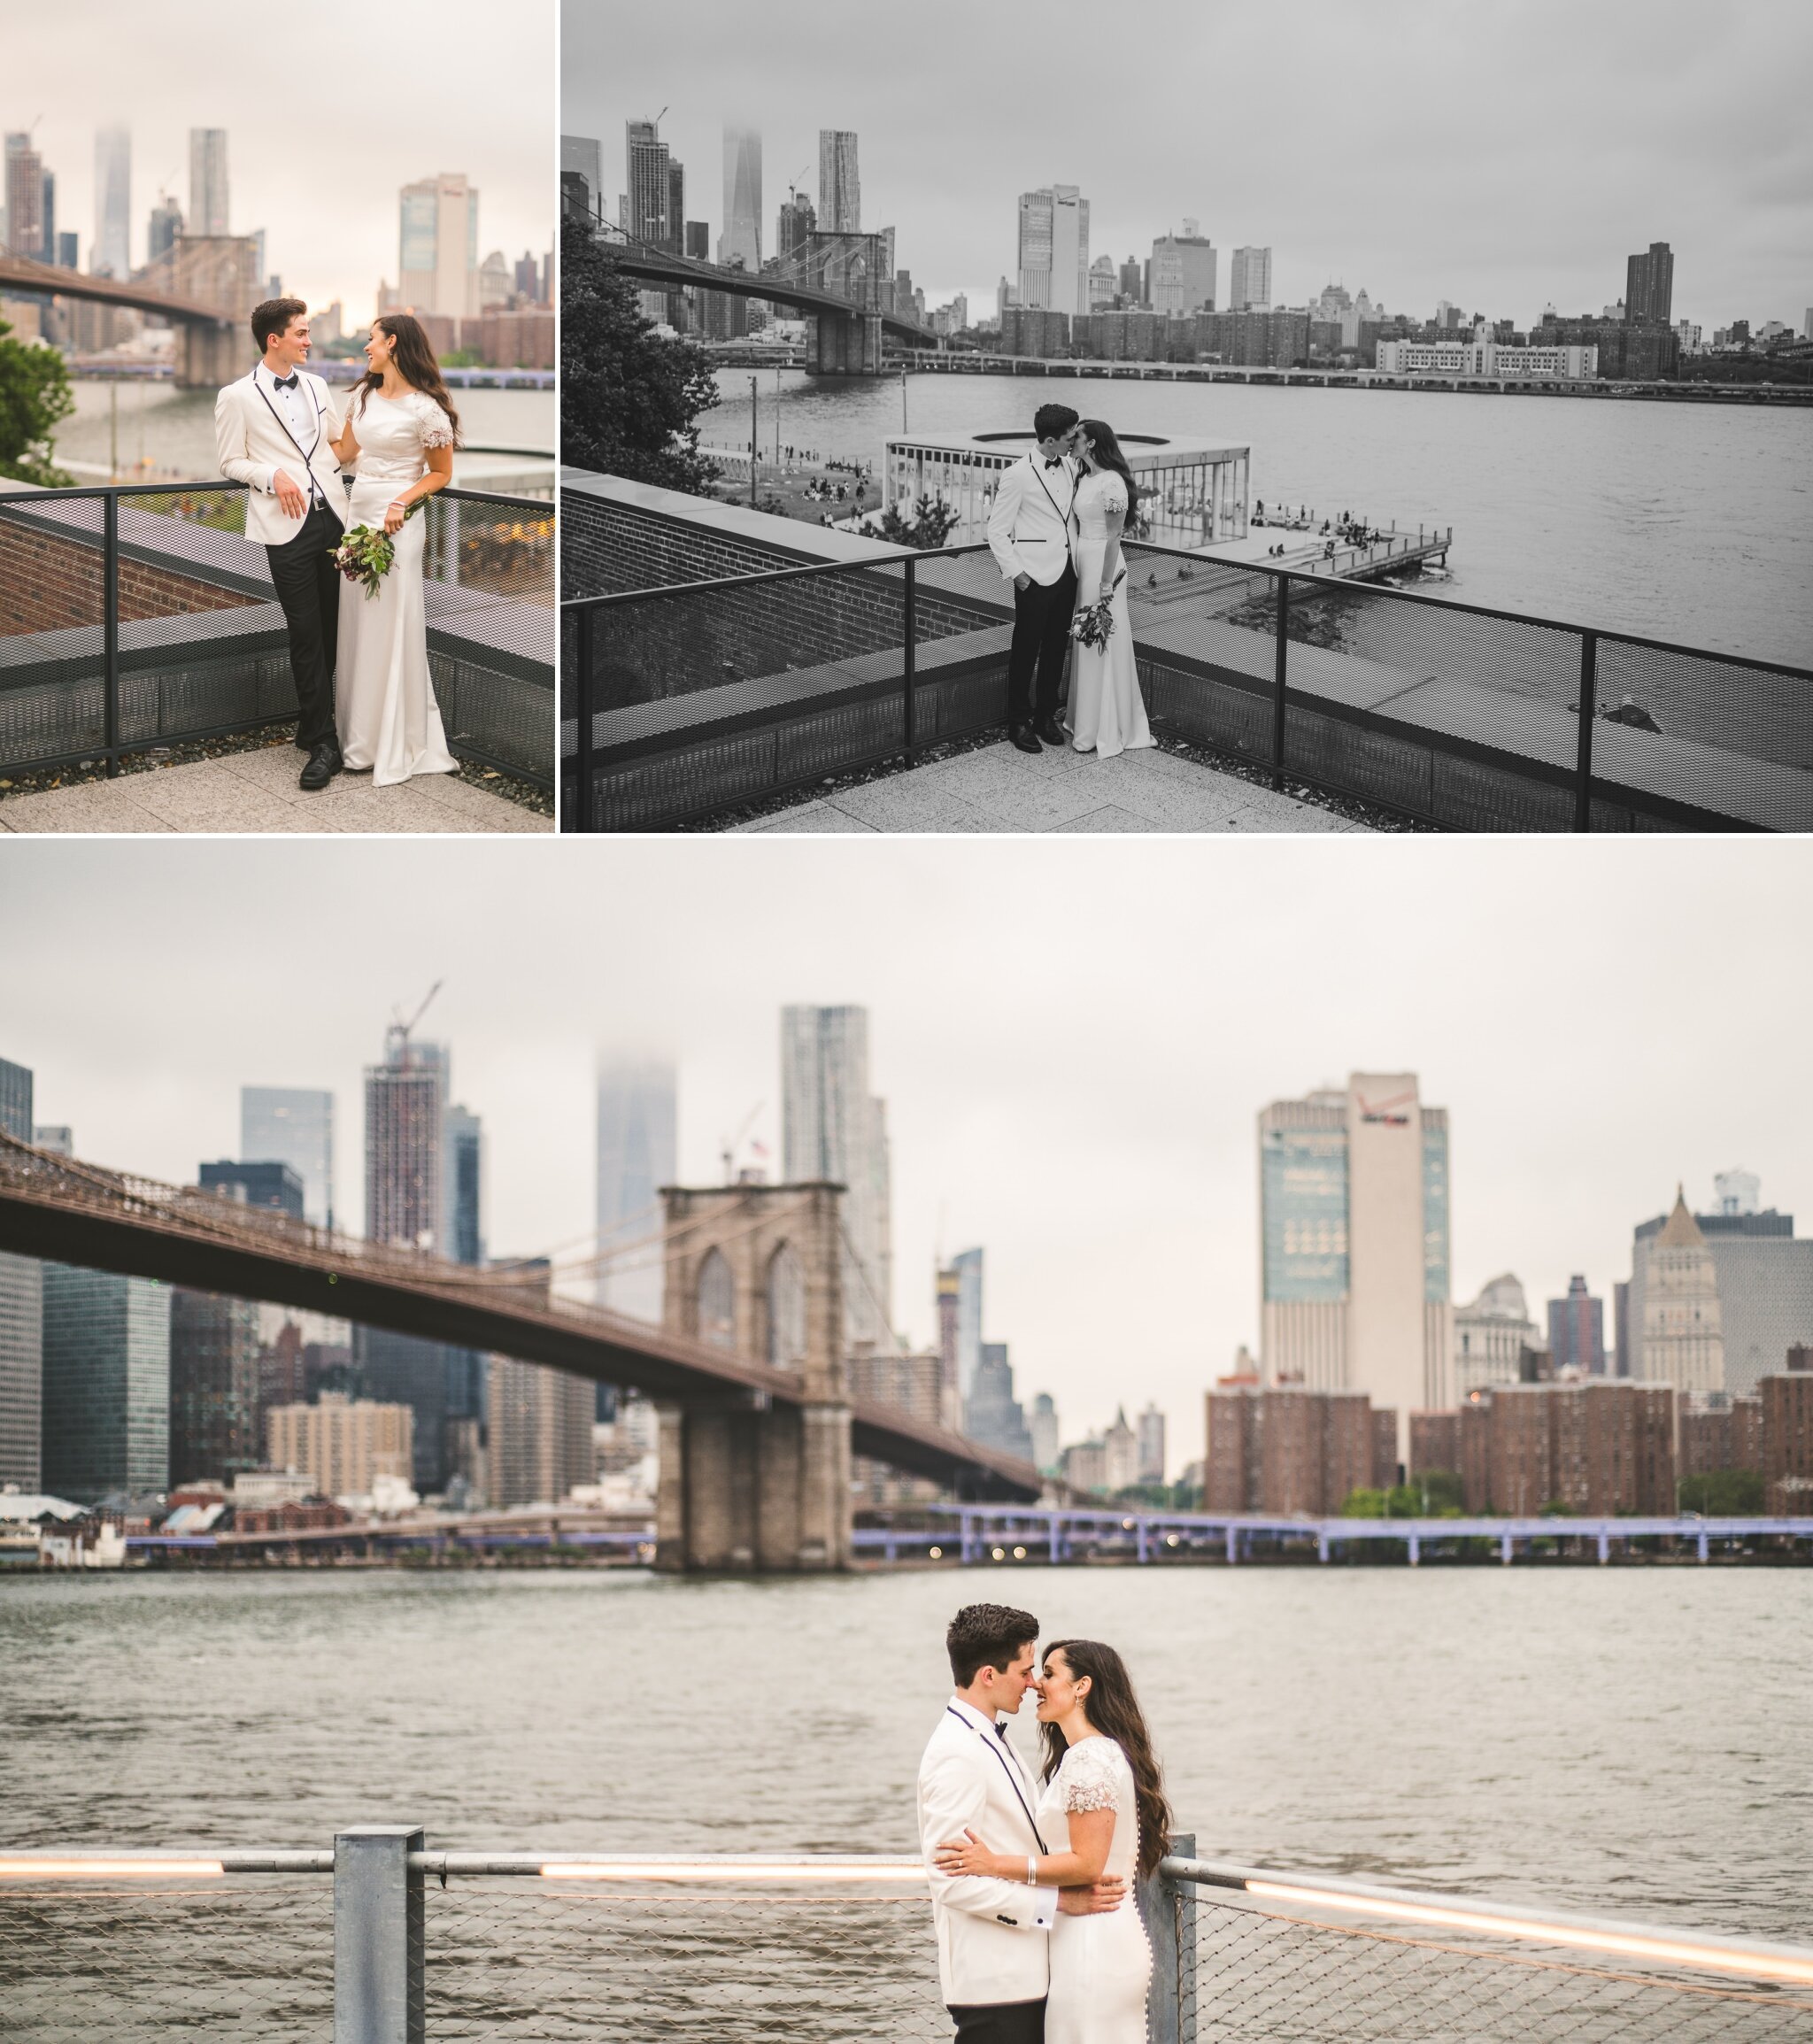  Photographs from John and Carson's wedding photography session by Jane's Carousel, DUMBO, and the Brooklyn and Manhattan Bridge. 